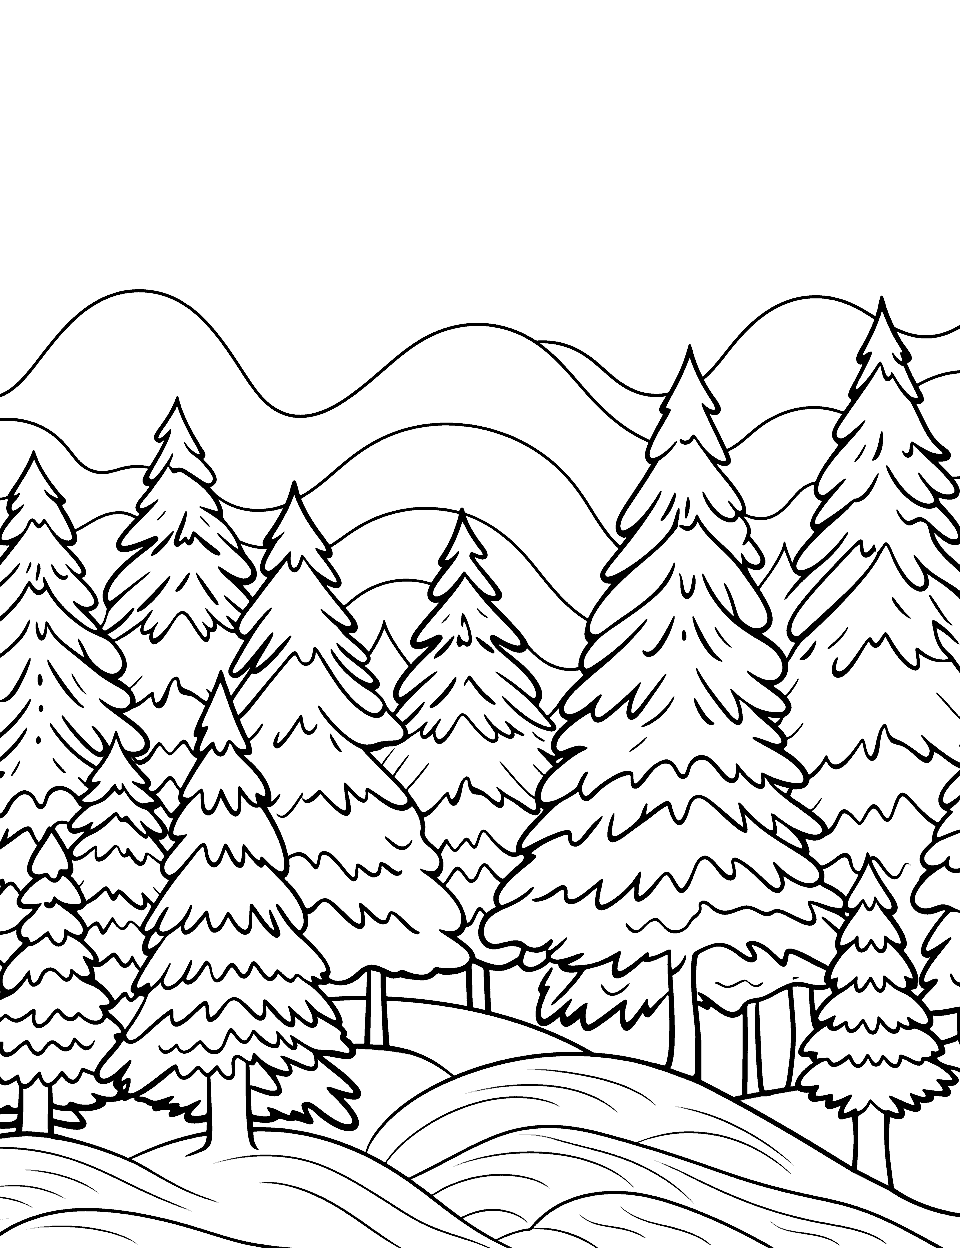 Winter Wonderland Forest Coloring Page - A forest winter scene with pine trees covered in snow.